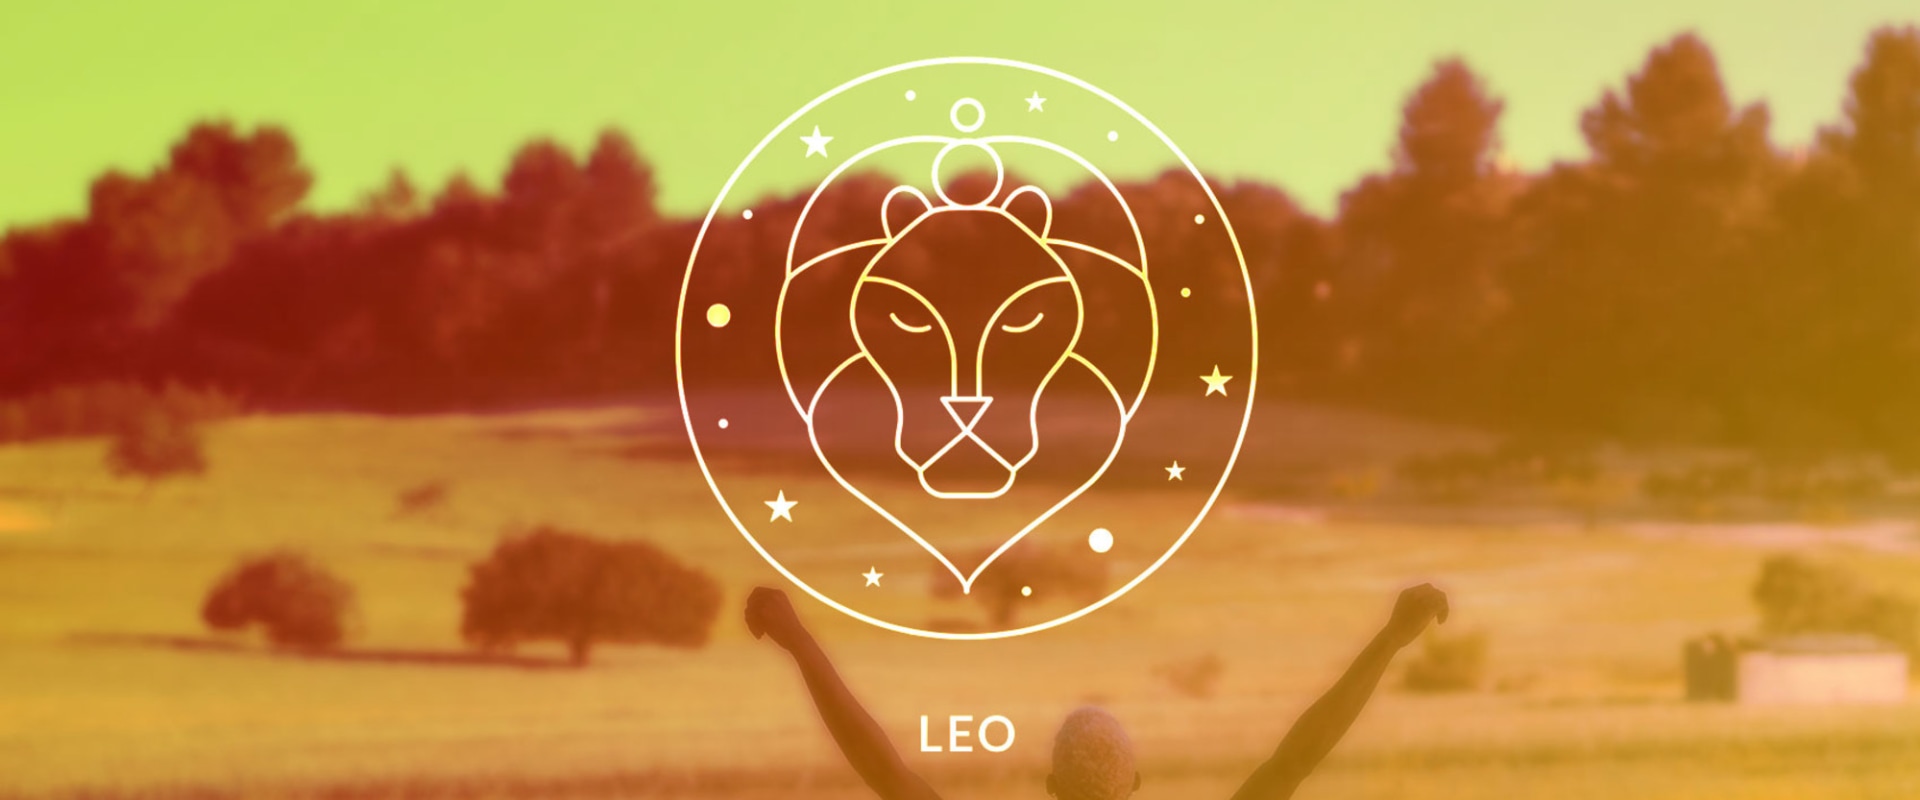 Leo Compatibility: Exploring the Connections between Leo Signs